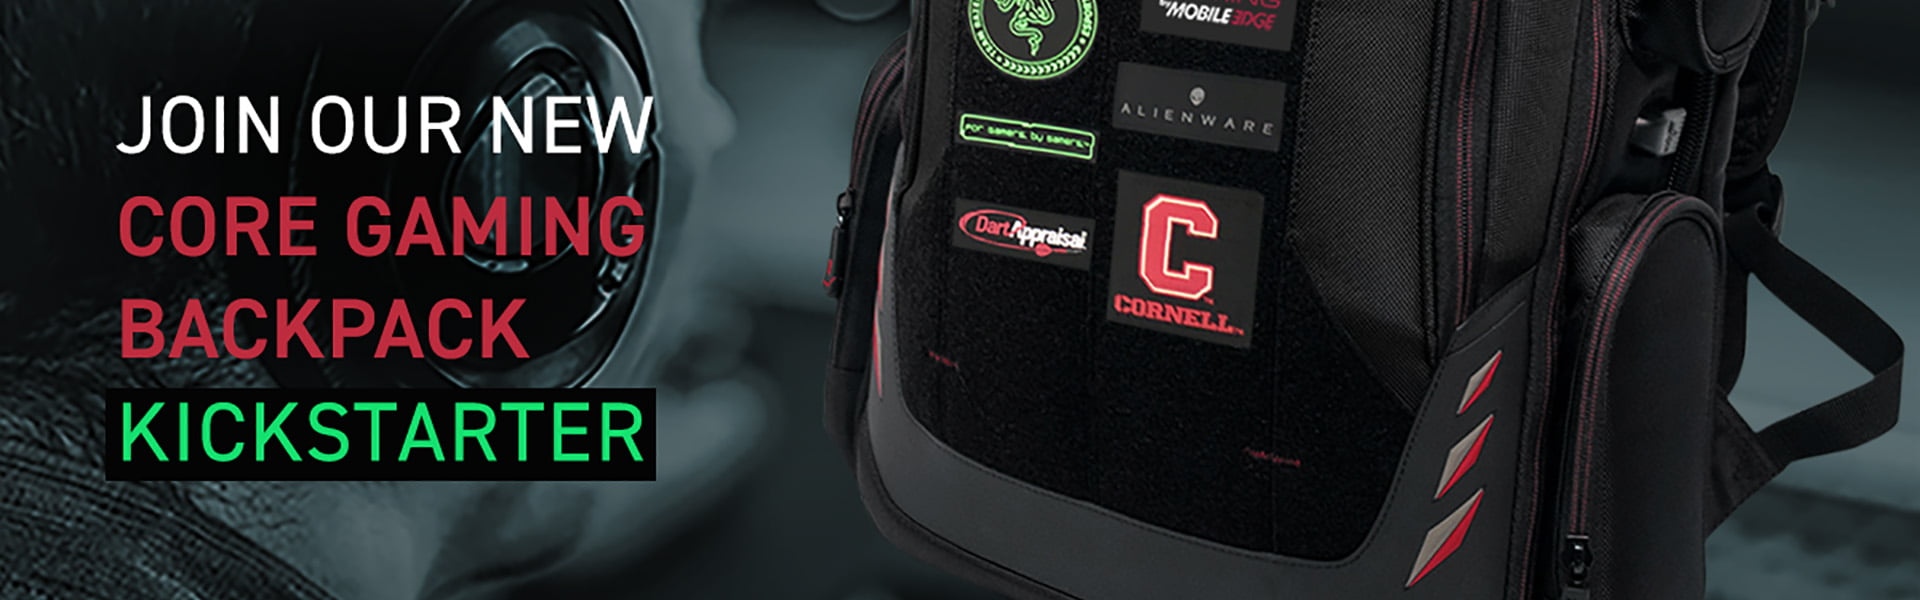 ‘CORE’ Gaming Backpack the Ultimate Gift for Gamers 21